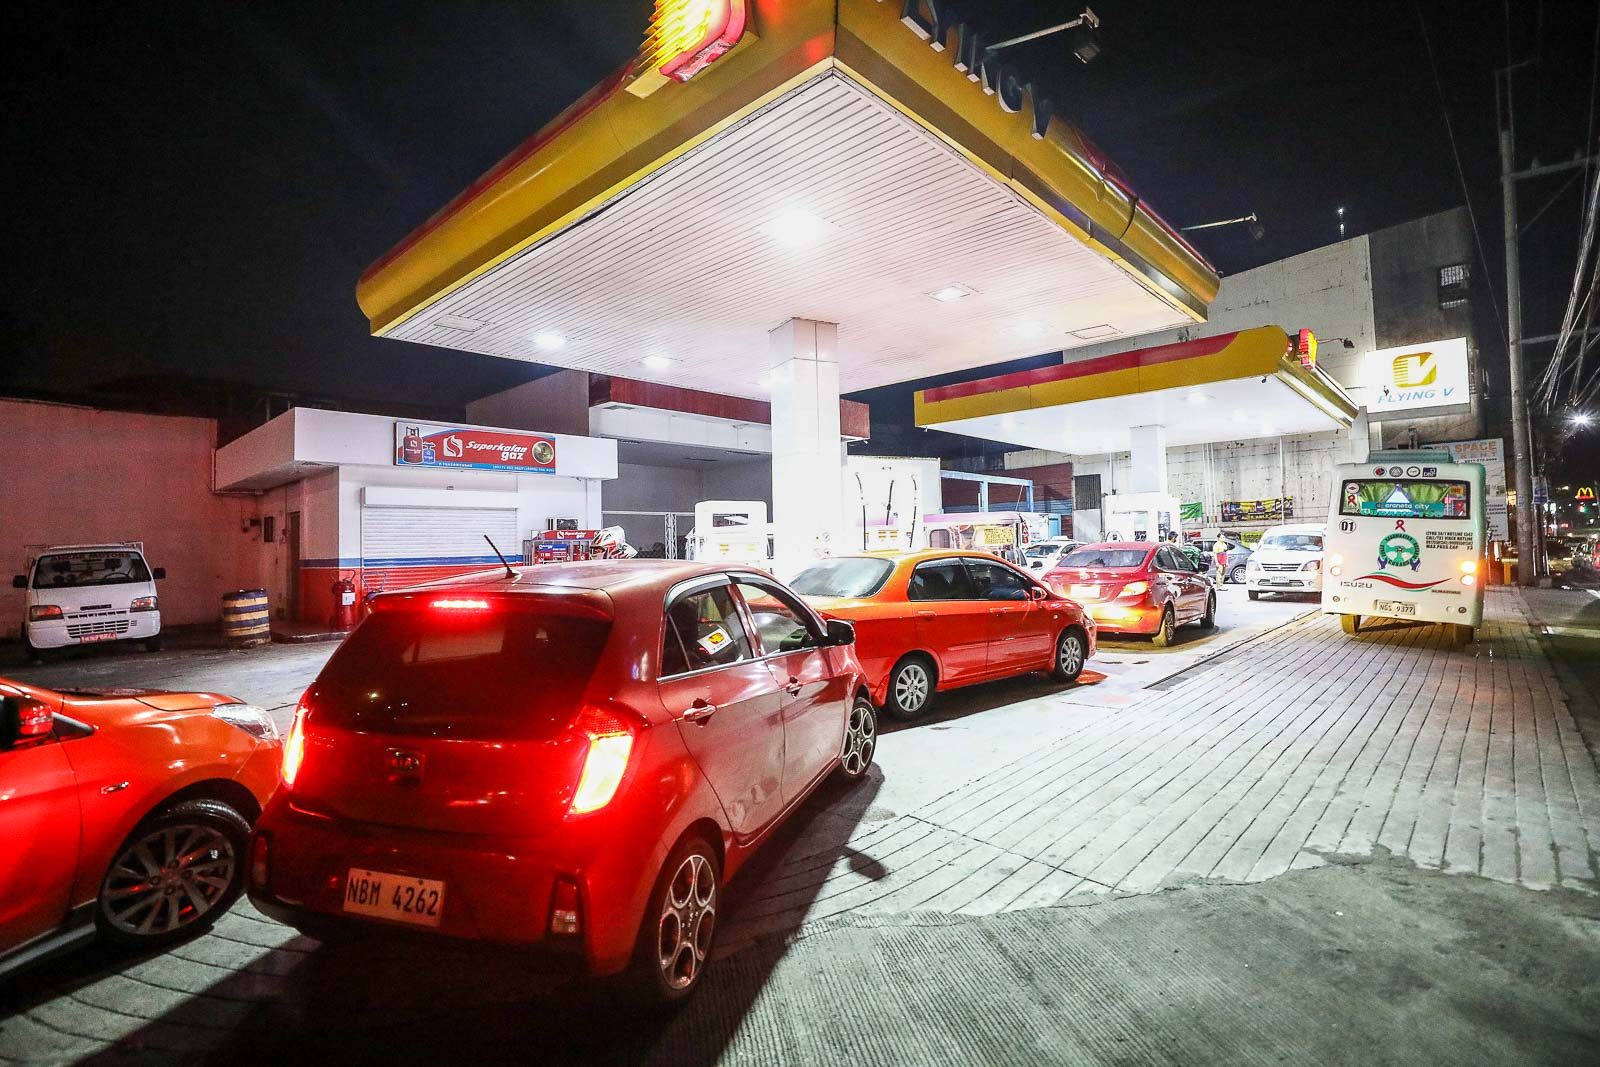 Finally, fuel price rollback set for March 22